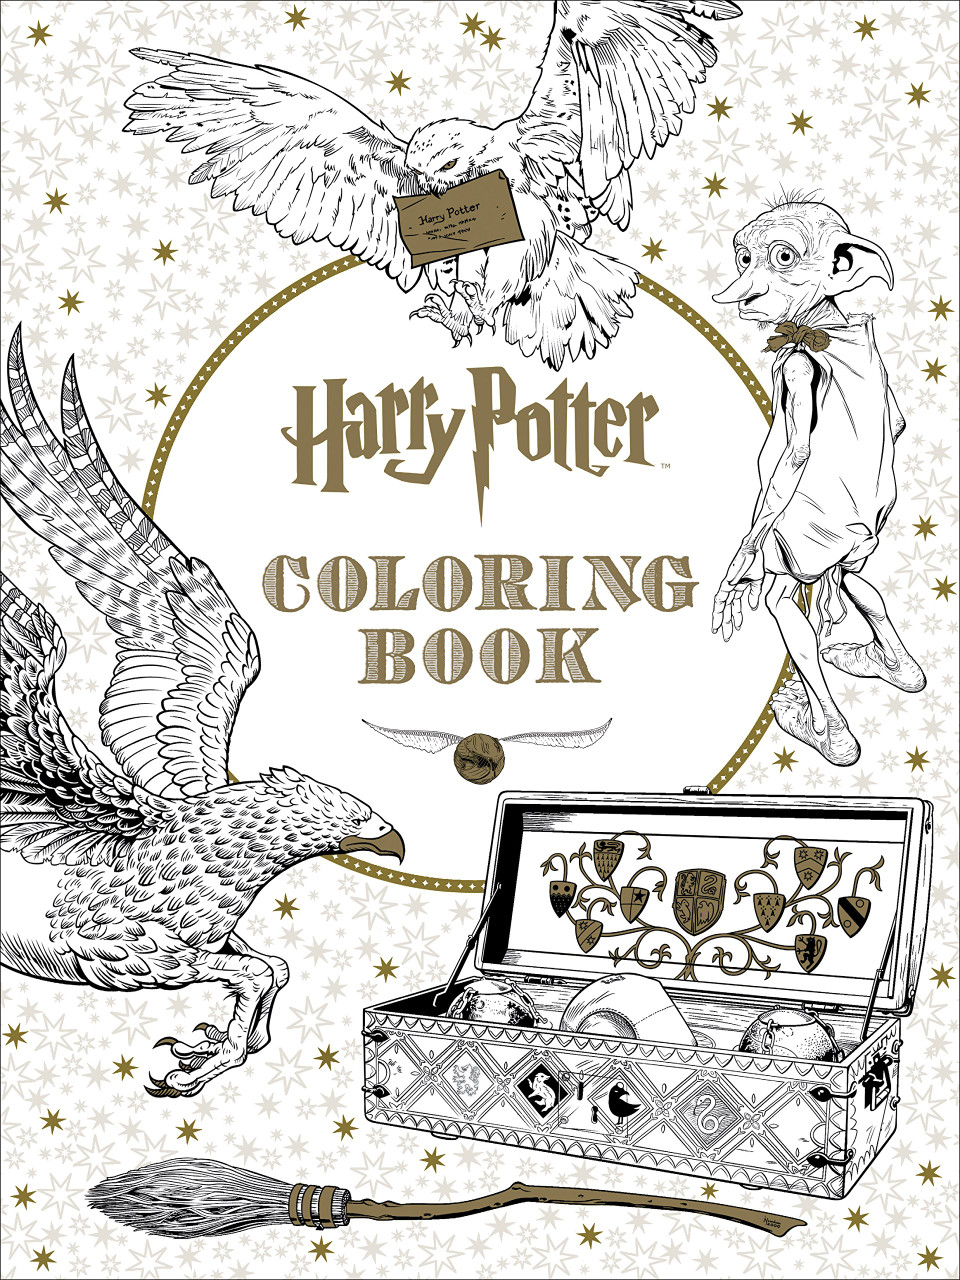 Sneak Peek Into the Next Harry Potter Coloring Book - BookPal